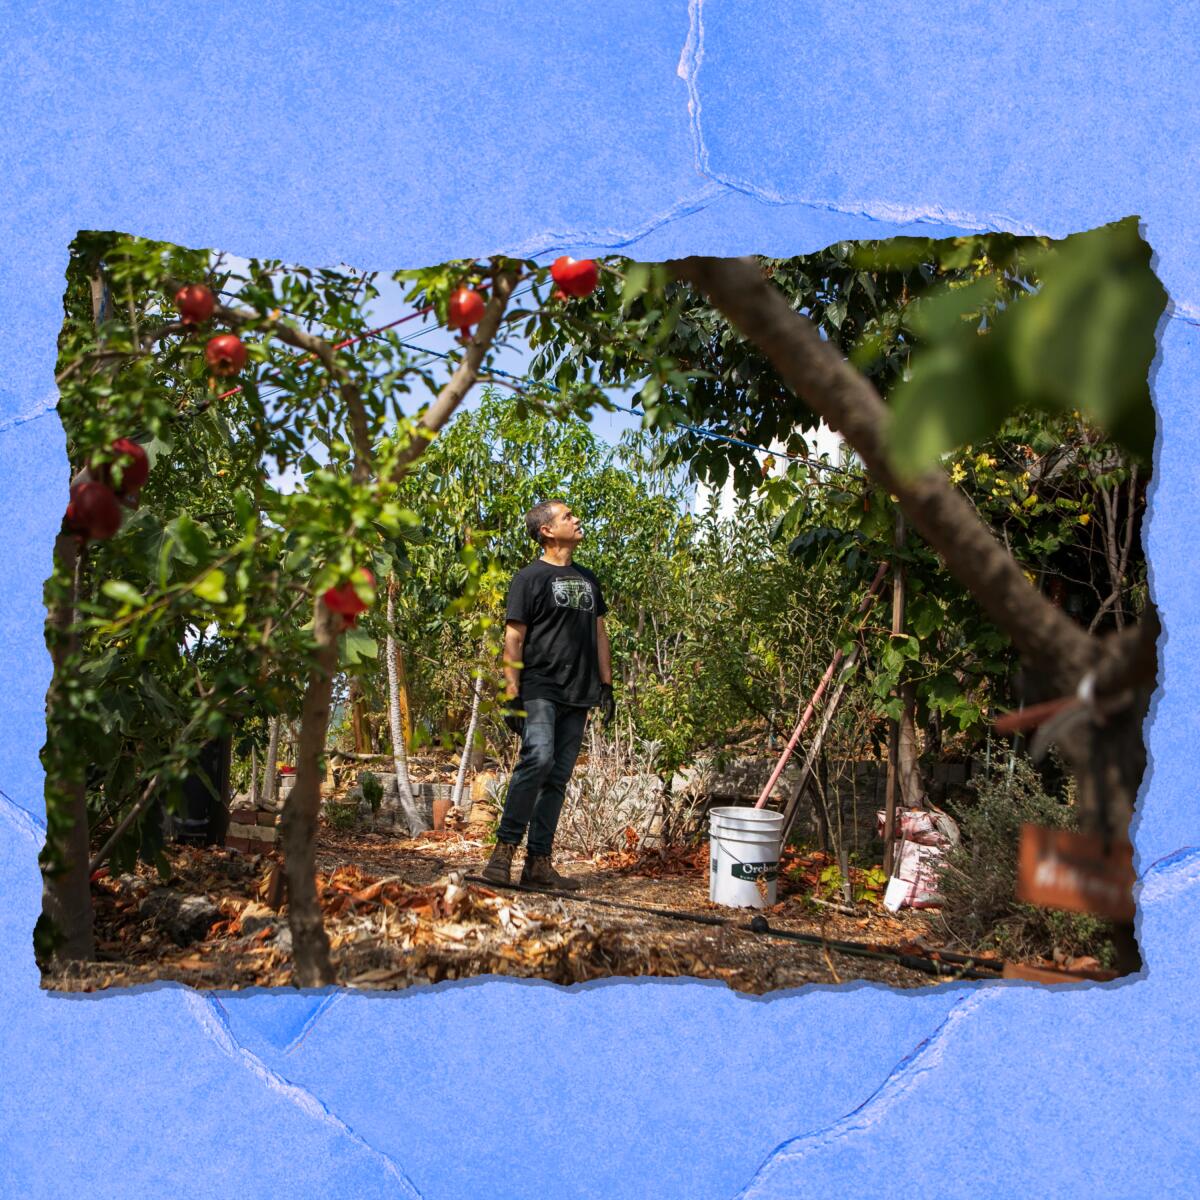 A person in work boots and gloves stands amid fruit trees.